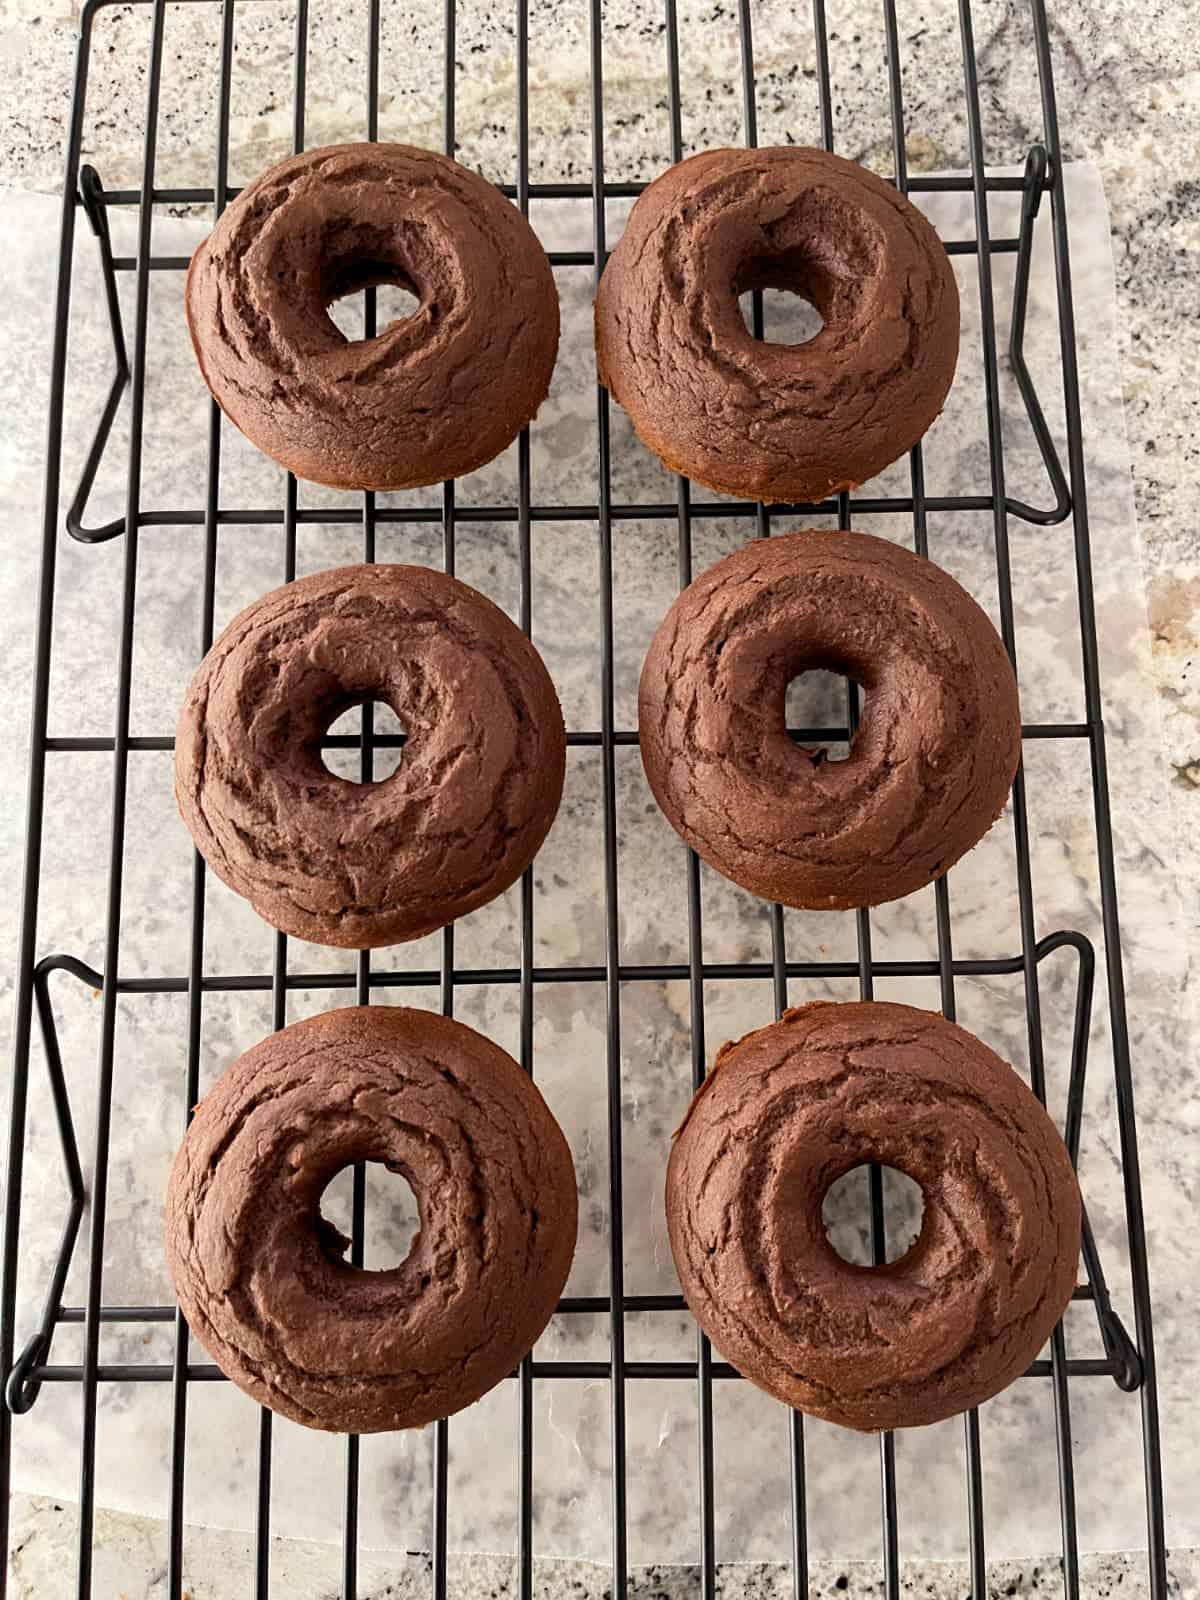 Mint chocolate donuts on wire cooling rack.